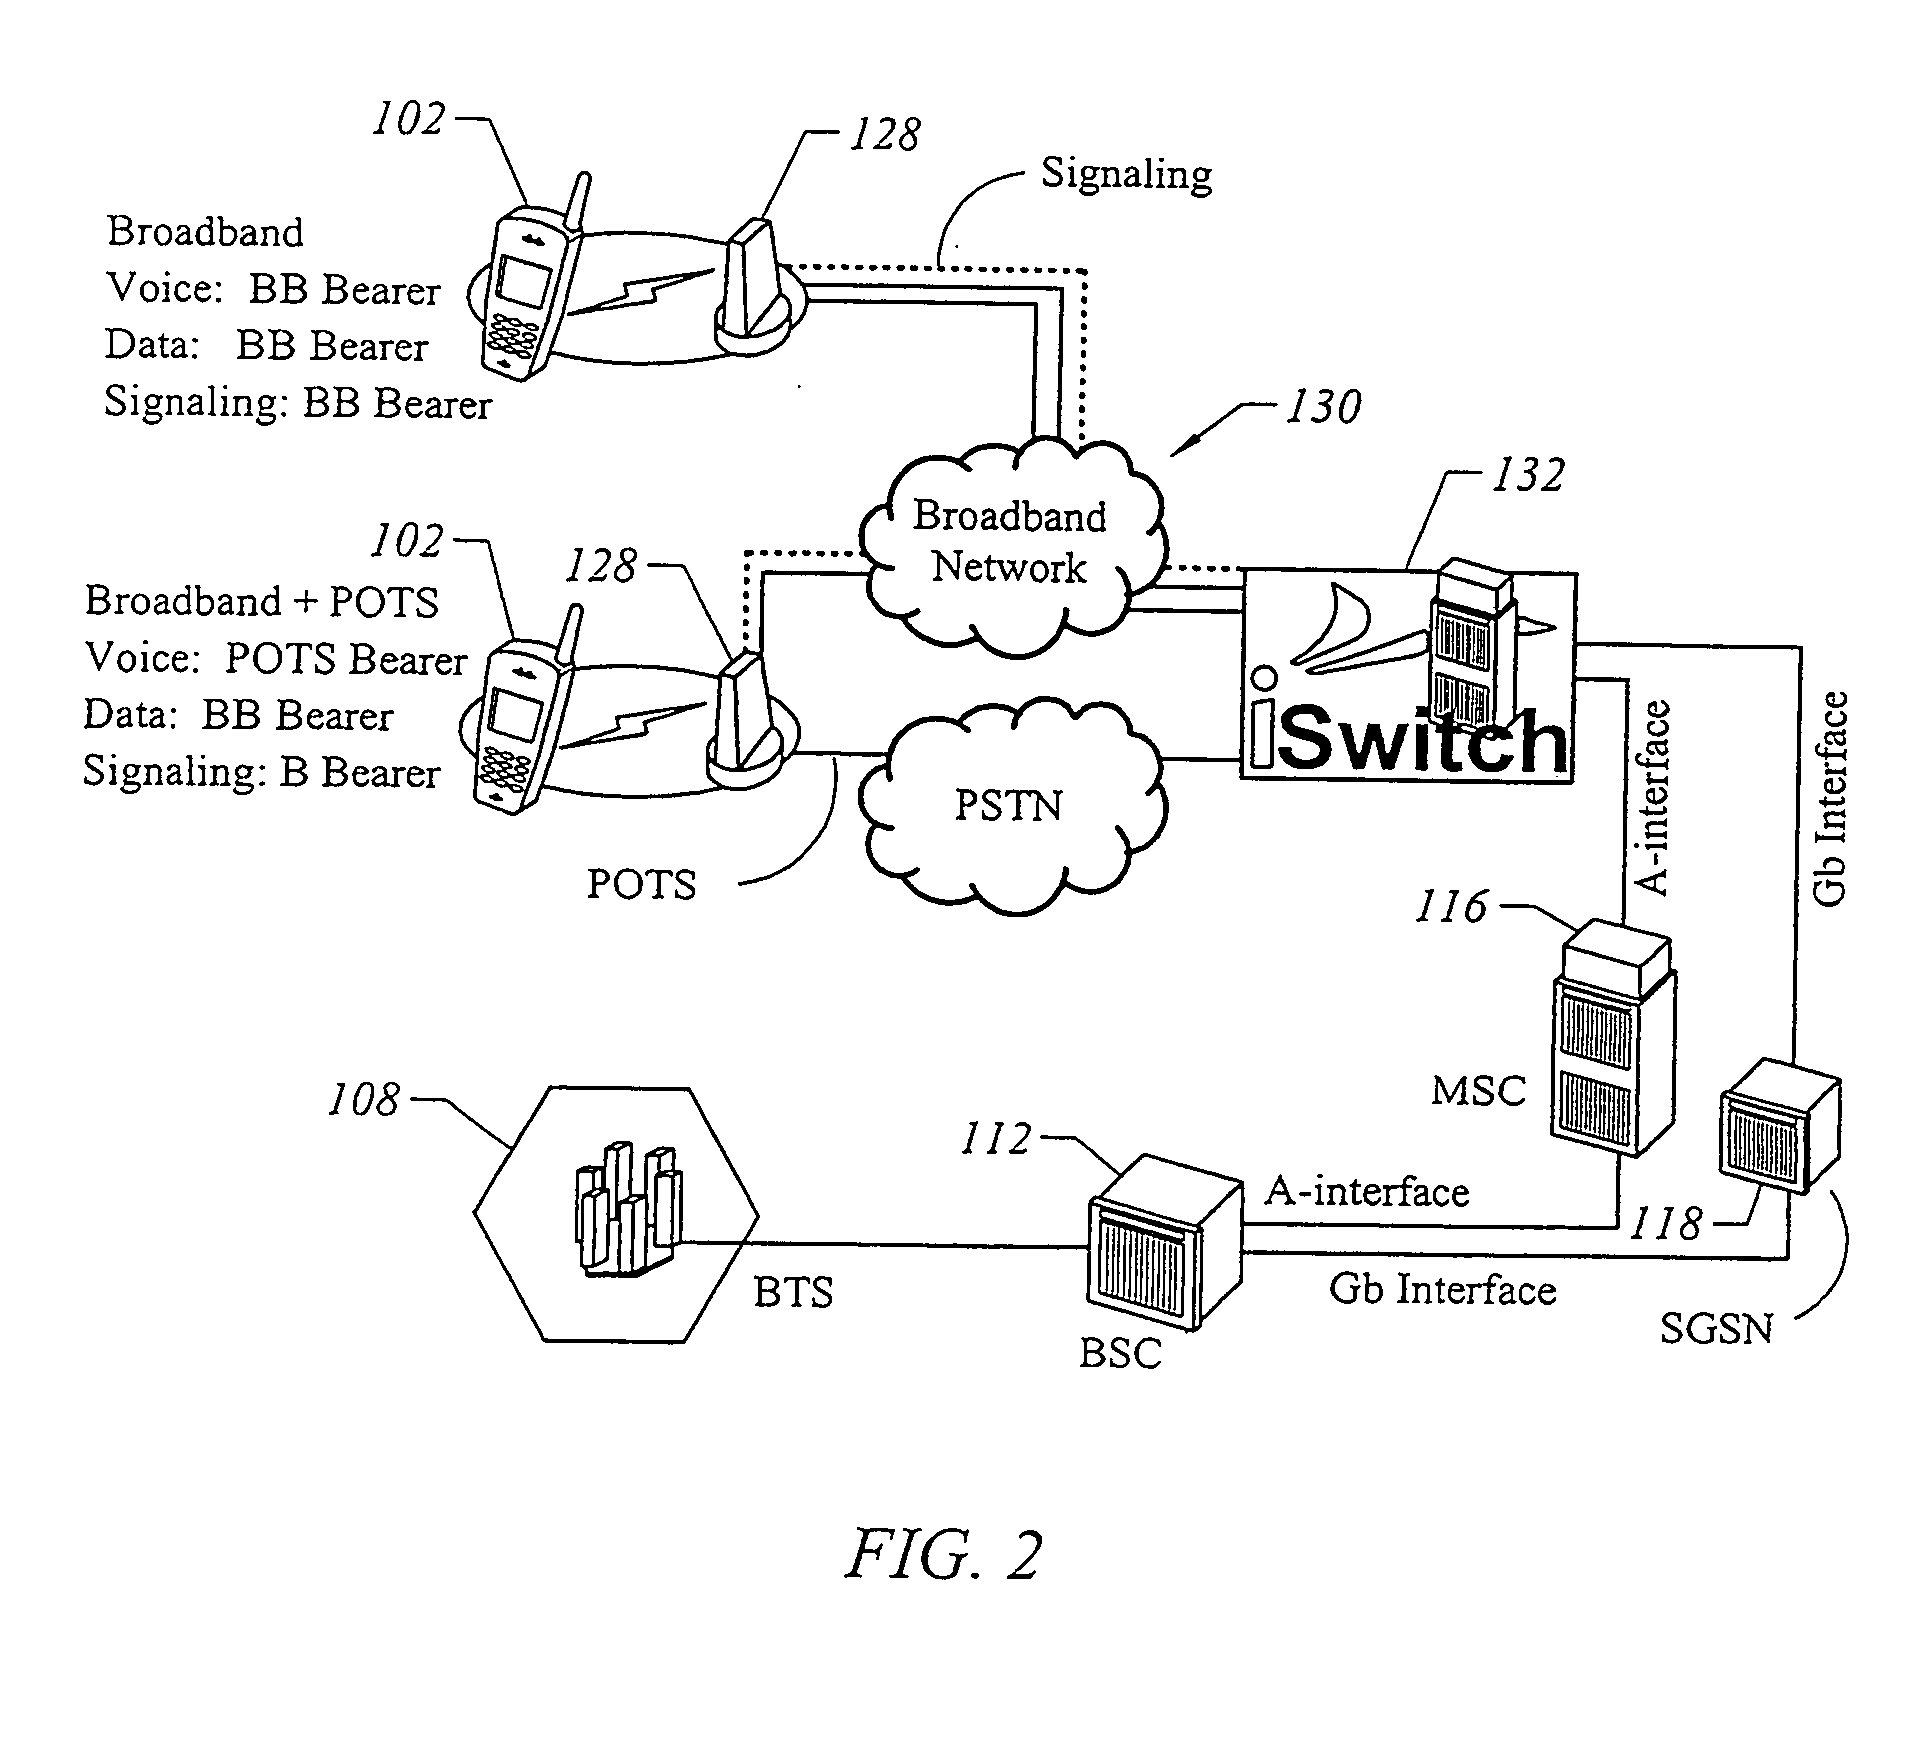 Mobile station messaging for release of radio resources in an unlicensed wireless communication system